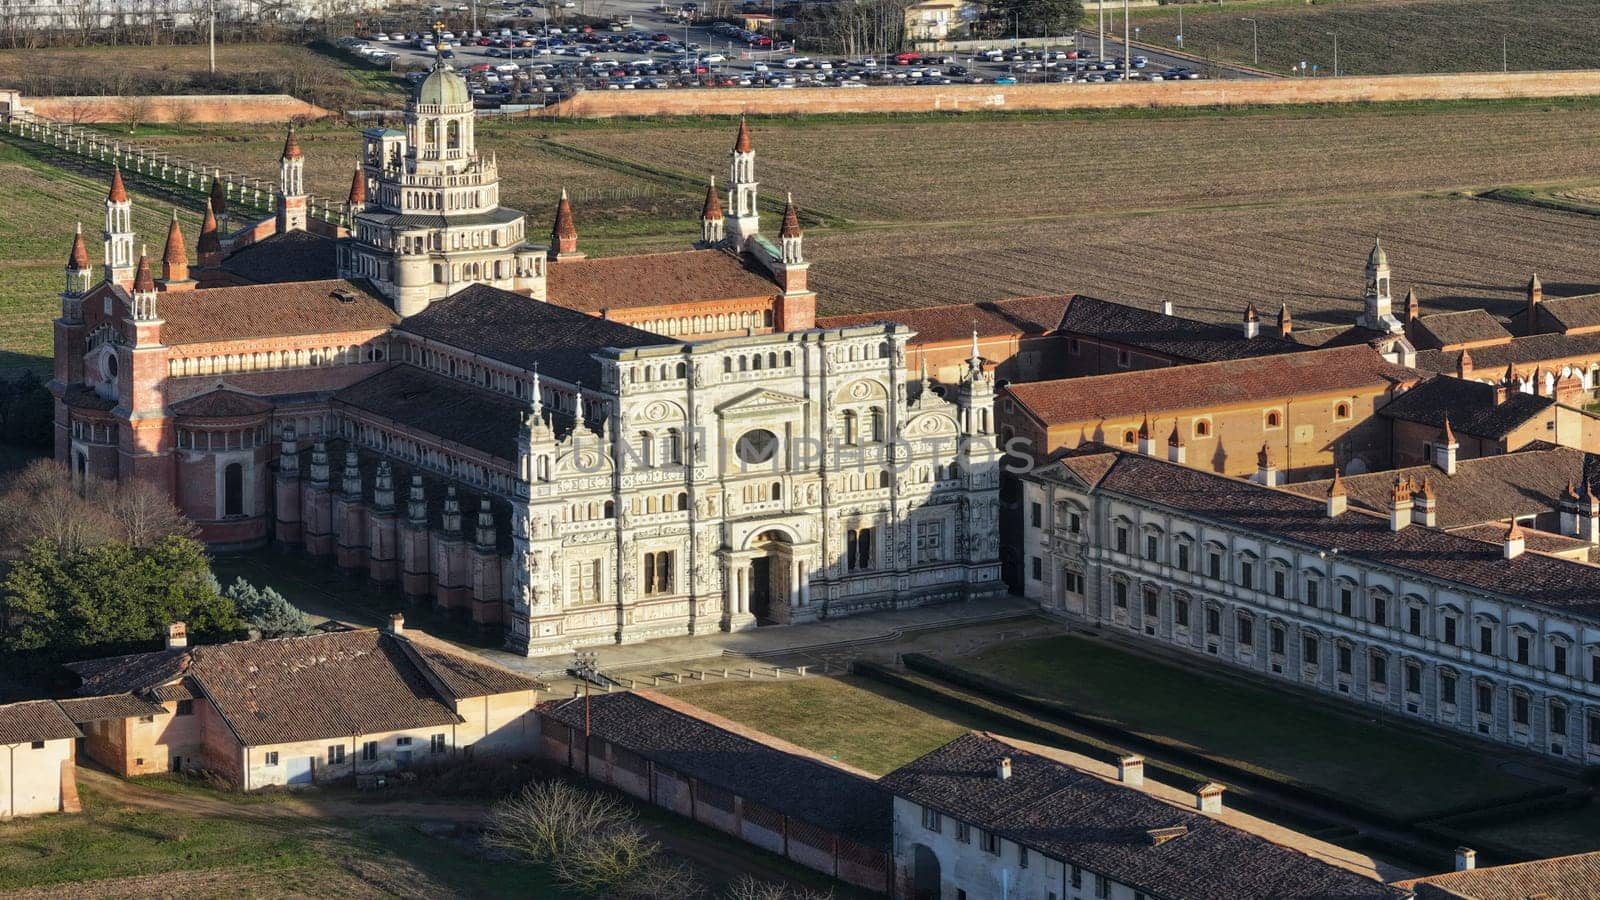 Drone shot over Certosa di Pavia monastery with lawn fields in Italy, Pavia